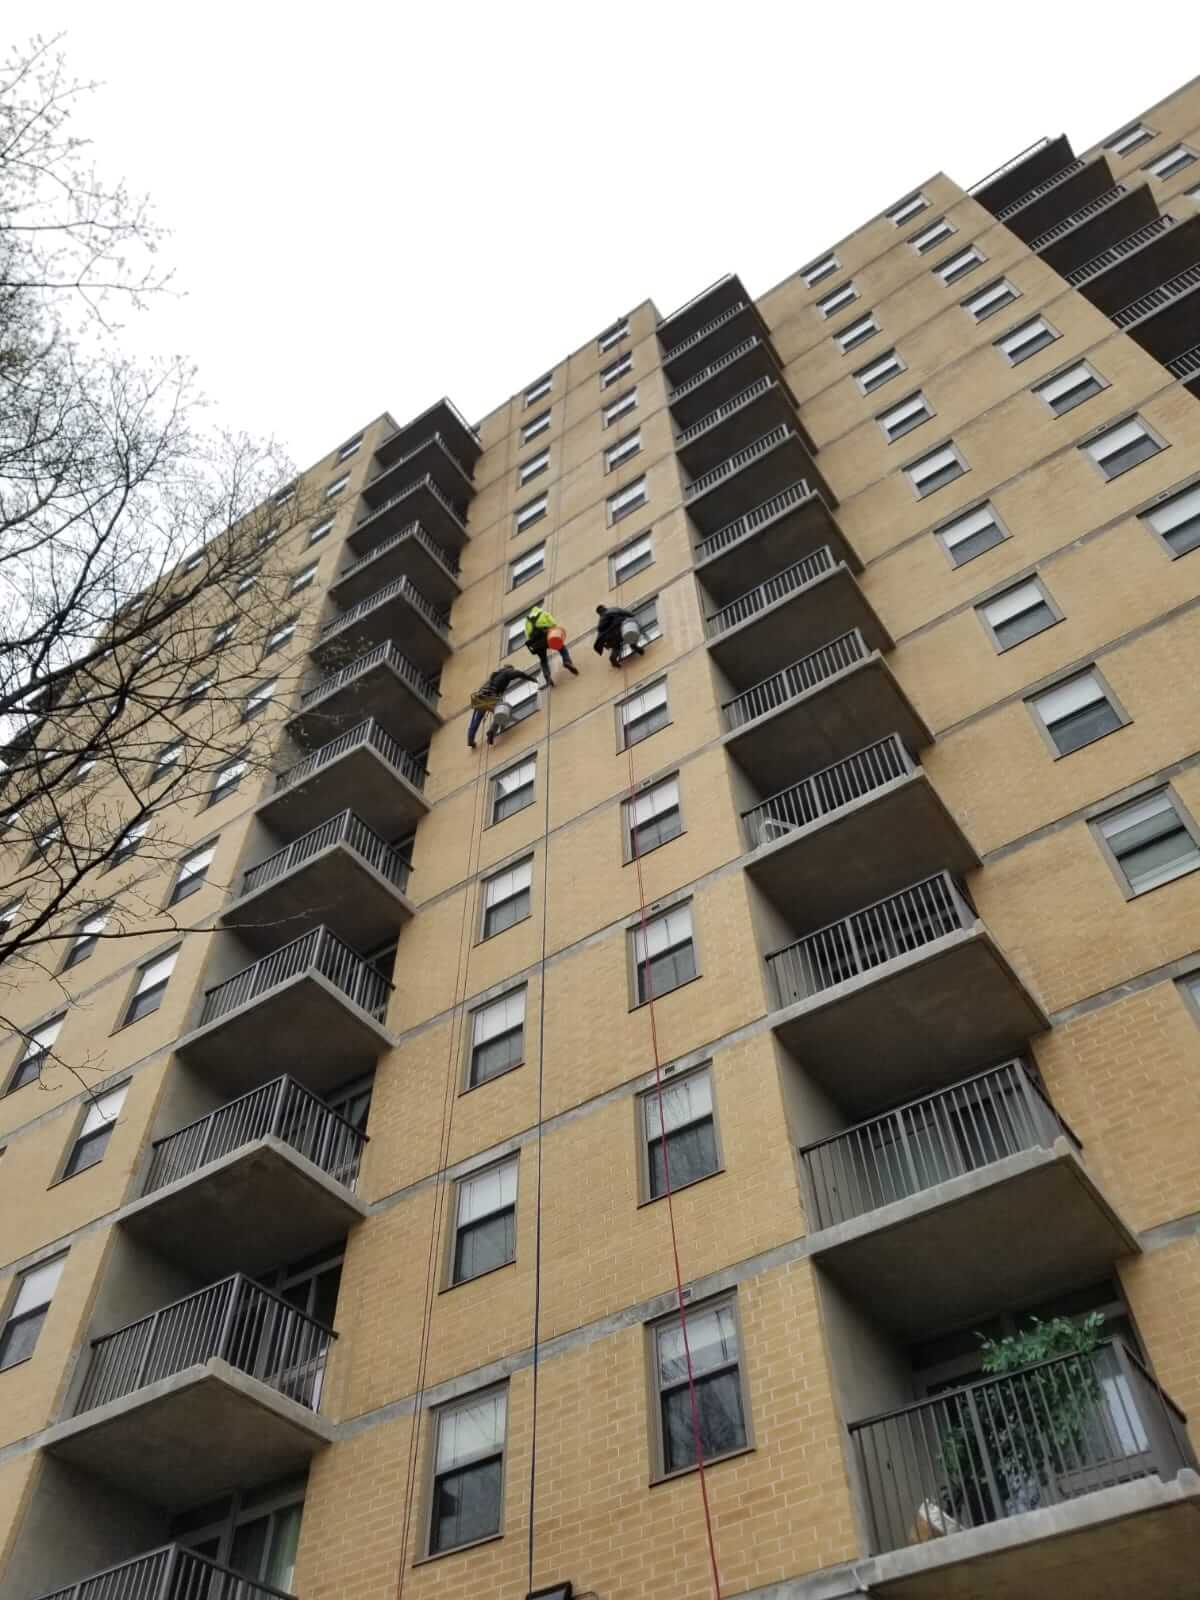 Presto waterproofing technicians rappelling off of B’nai B’rith Apartments, Allentown, PA